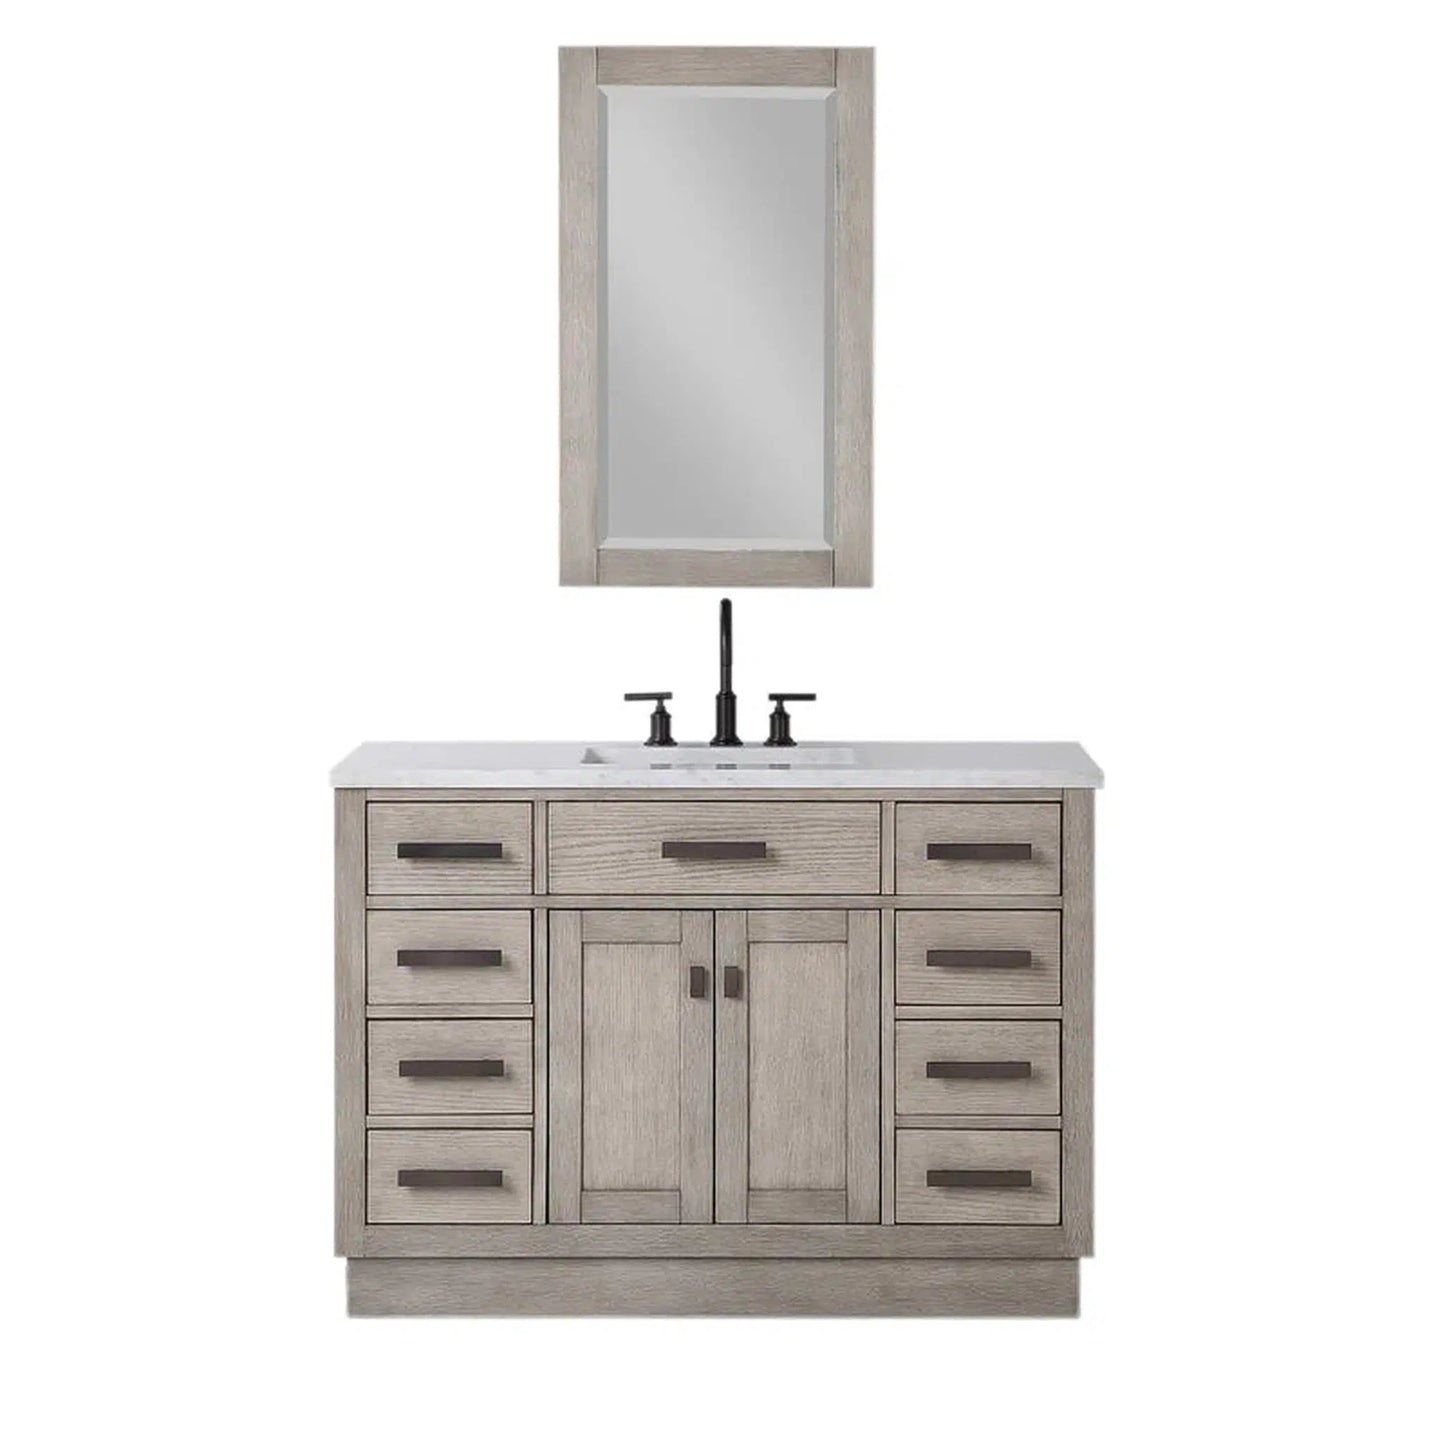 Water Creation American 20th Century Classic Widespread Lavatory Faucets With Pop-Up Drain in Polished Nickel Finish With Porcelain Lever Handles, Hot And Cold Labels Included